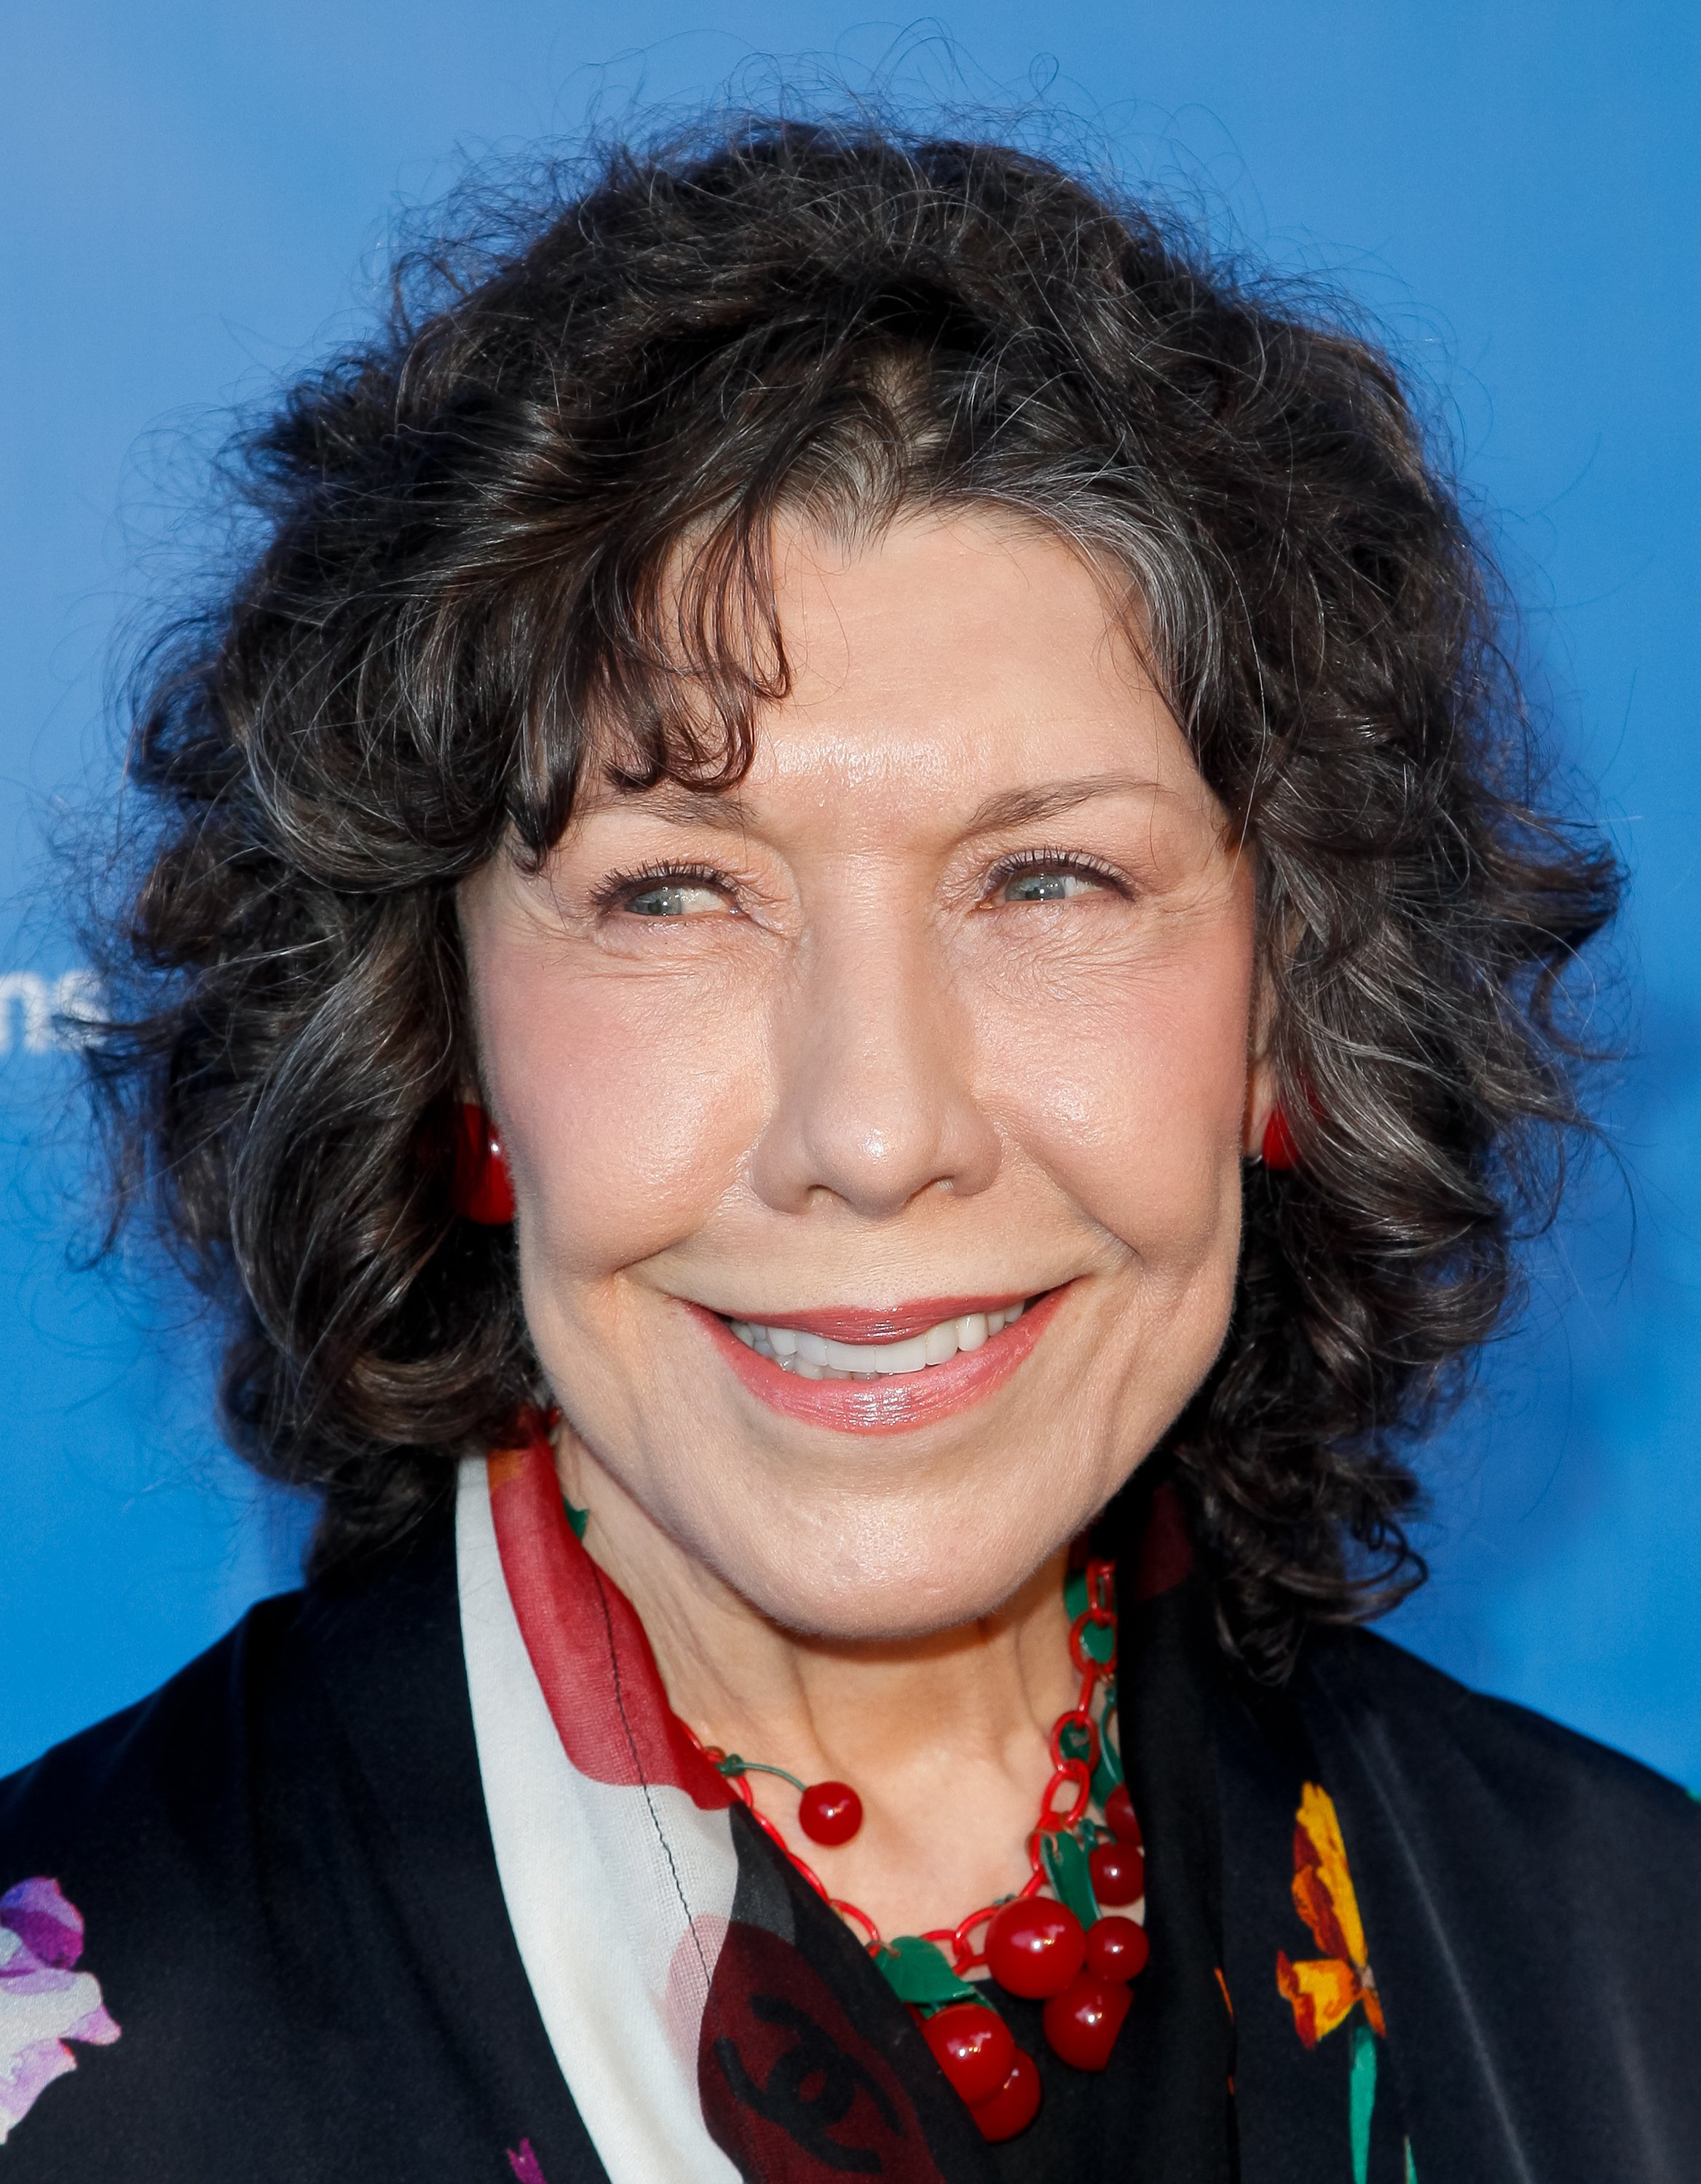 Lily Tomlin attends the 10th annual Oceana SeaChange Summer Party at Private Residence on July 15, 2017, in Laguna Beach, California. | Source: Getty Images.